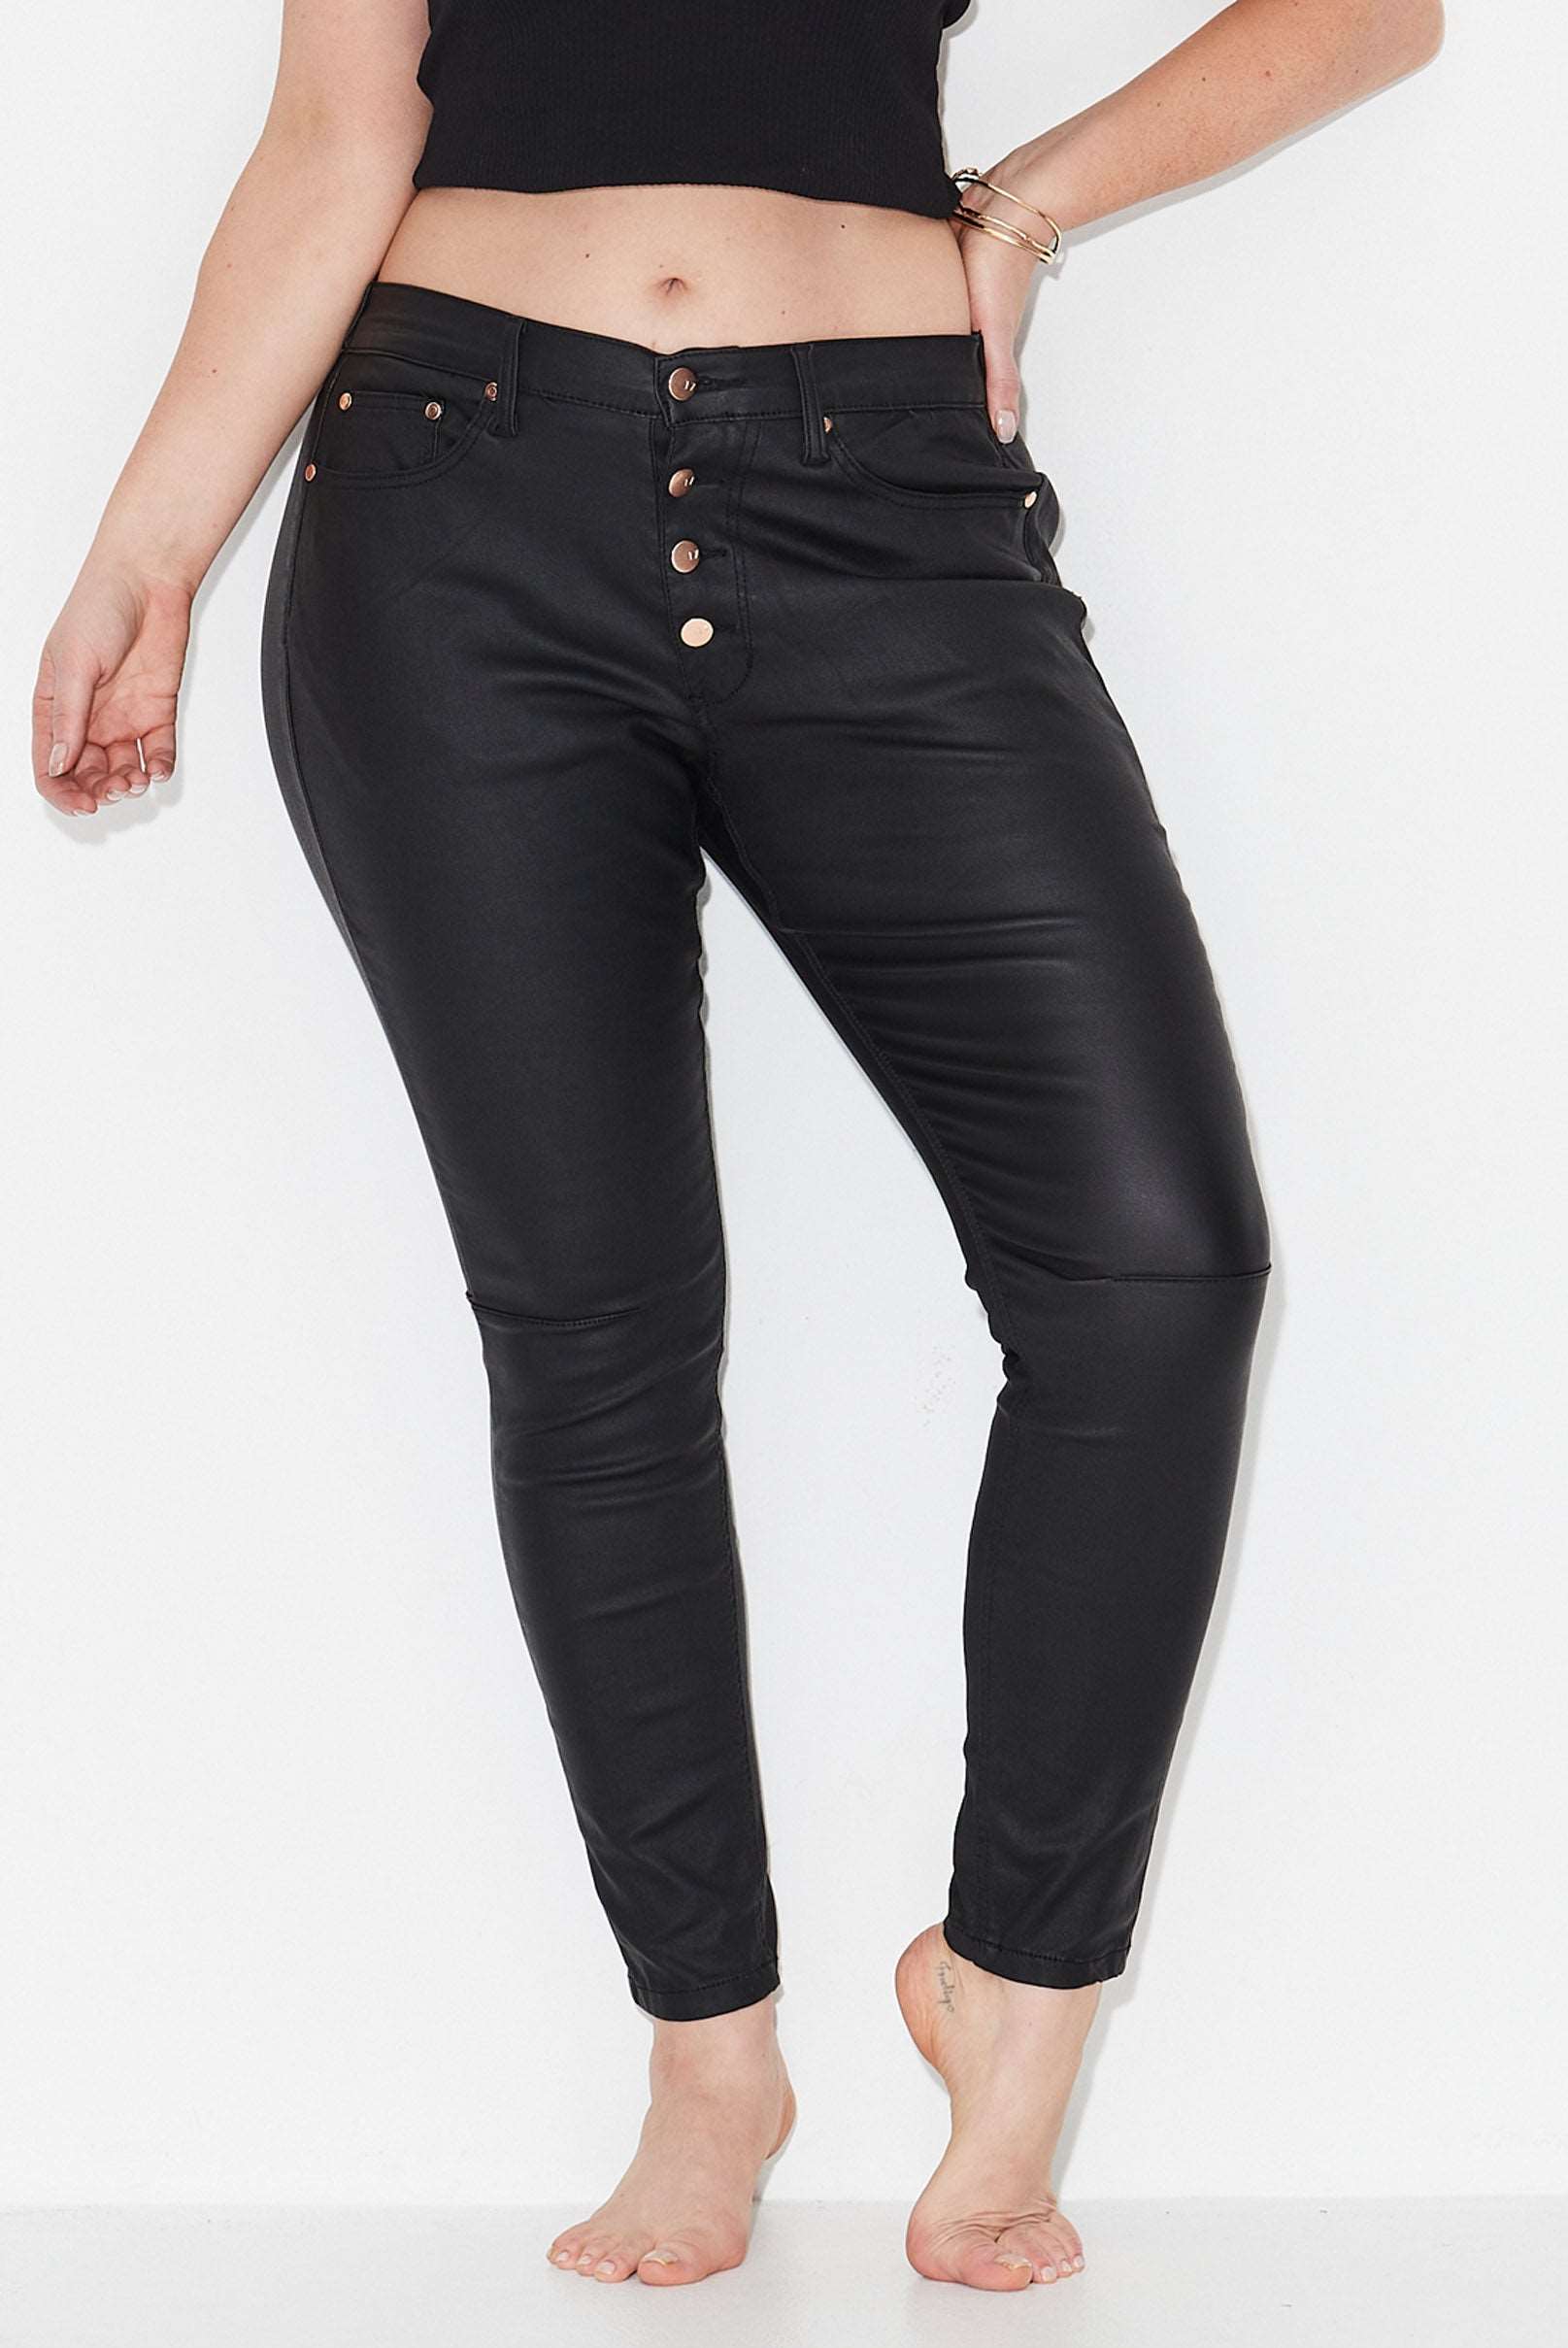 Model wears black plus size jeans with tapered leg and exposed button front 